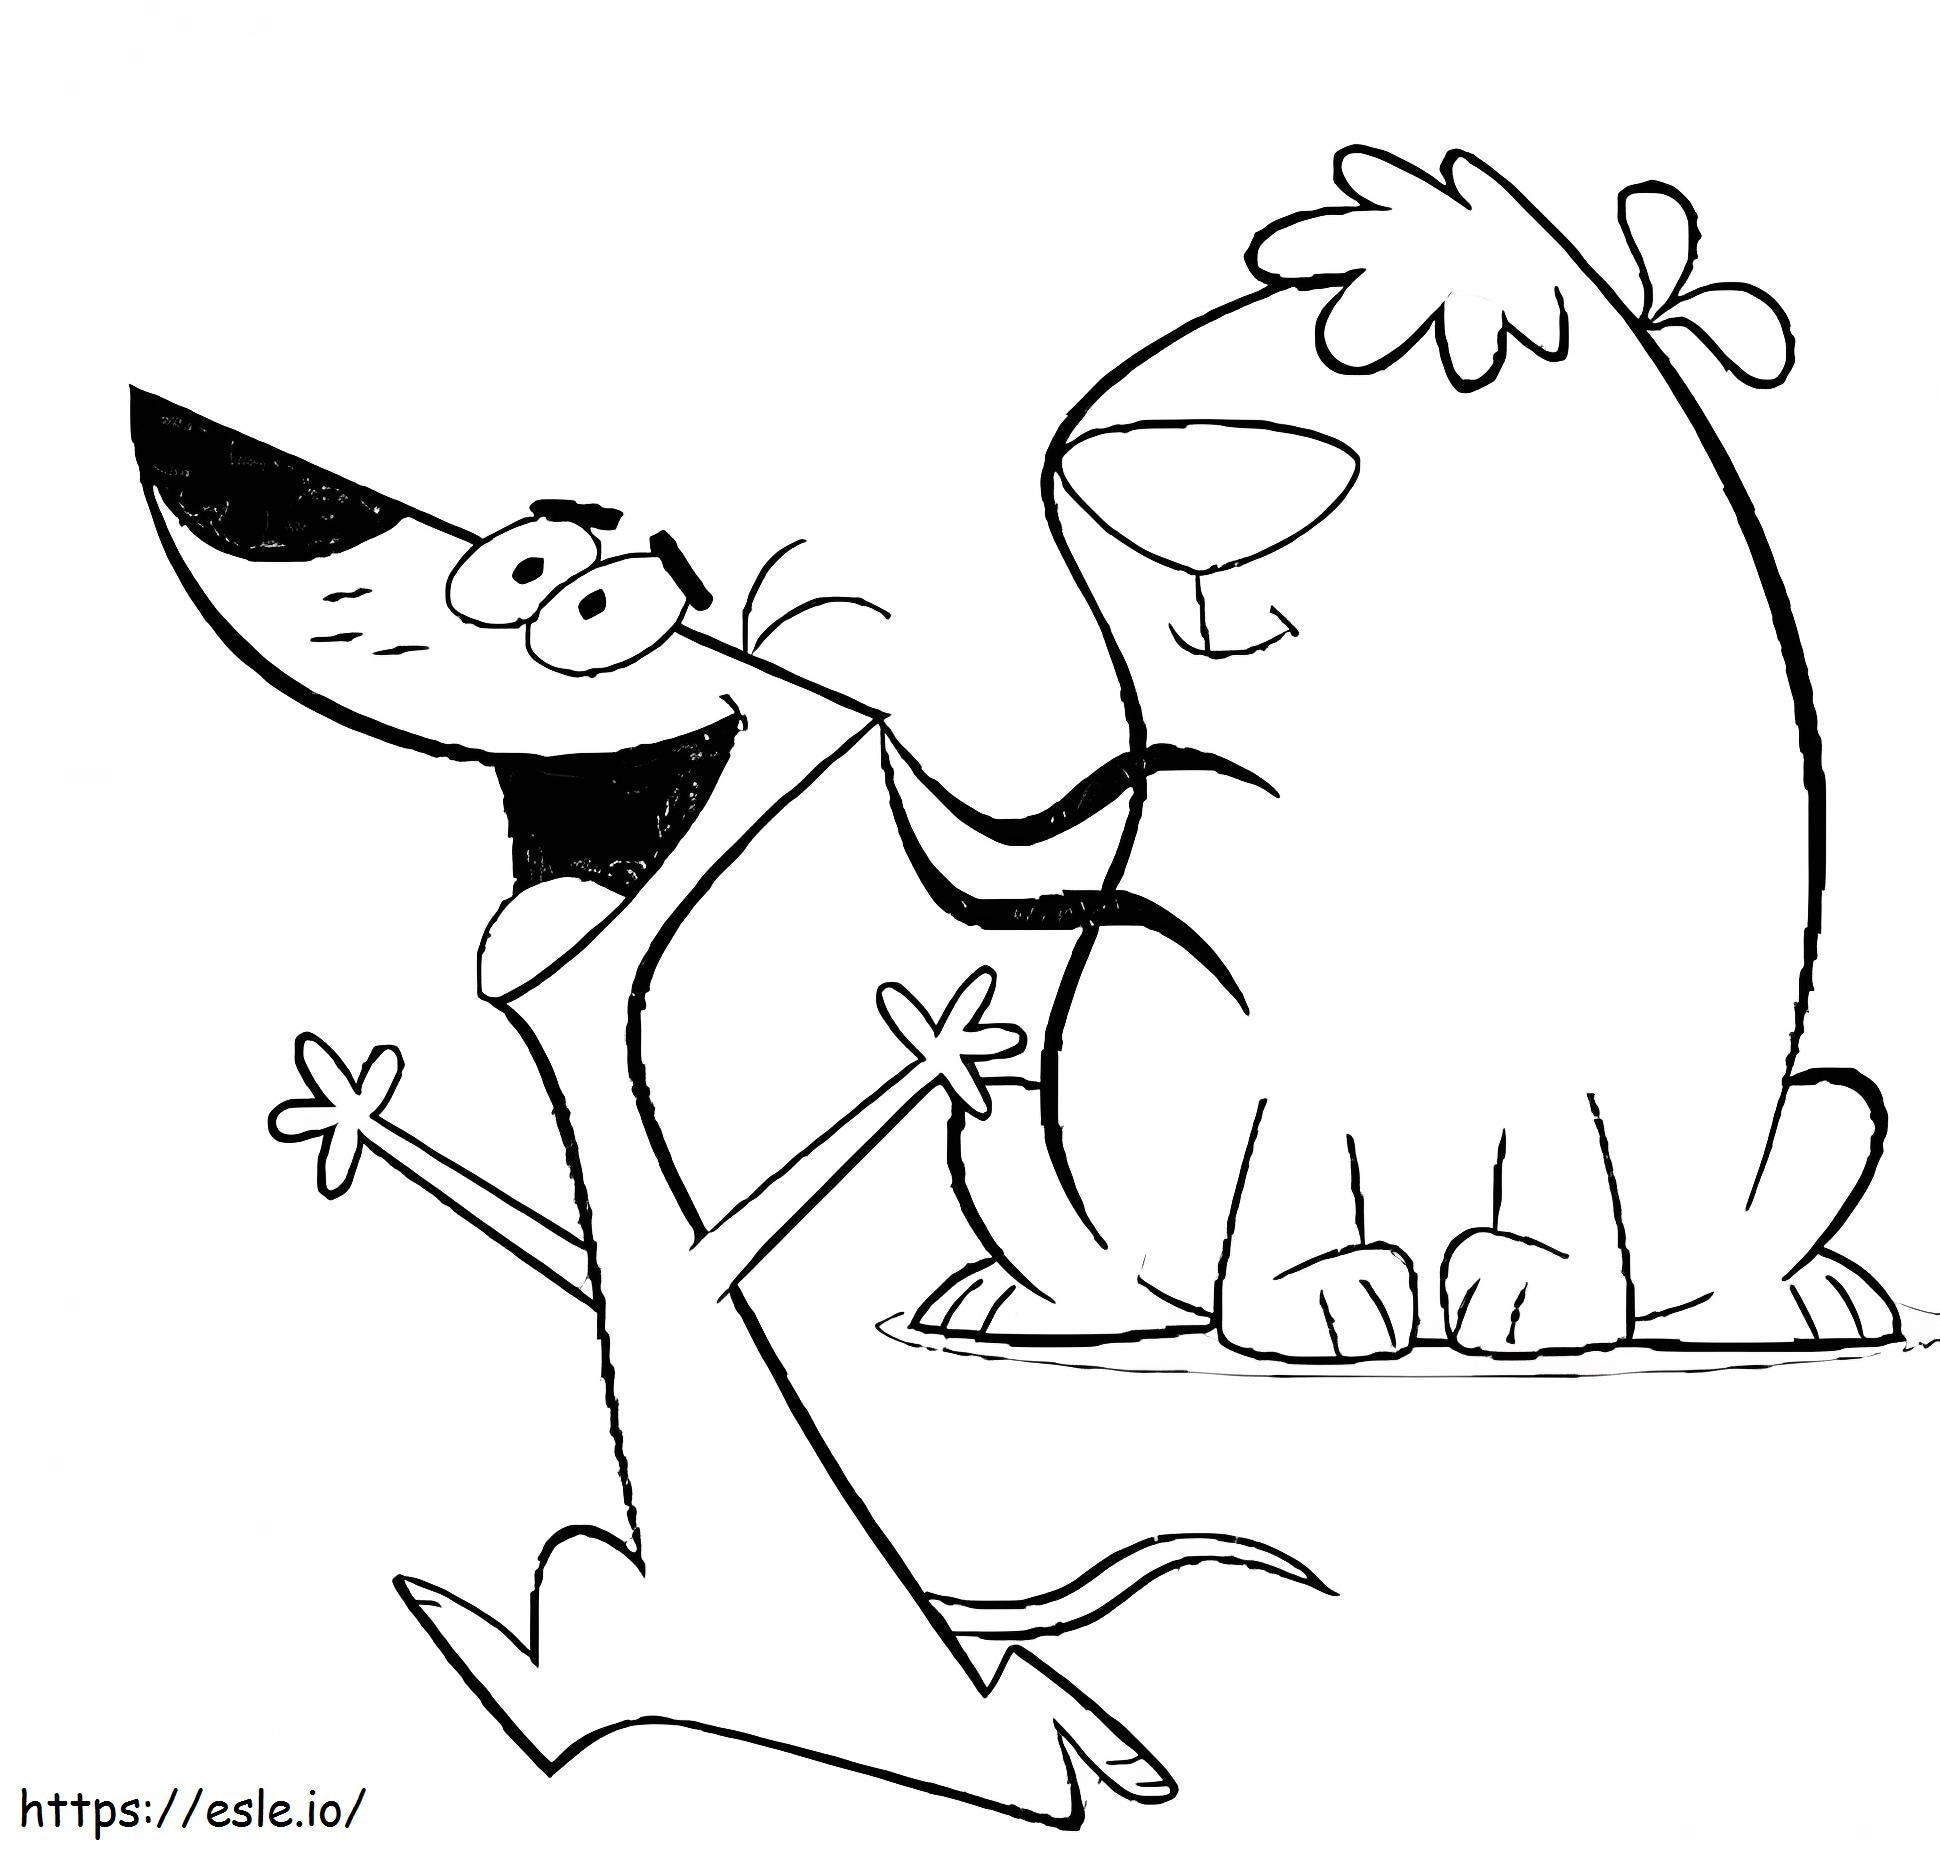 Big Dog And Little Dog coloring page